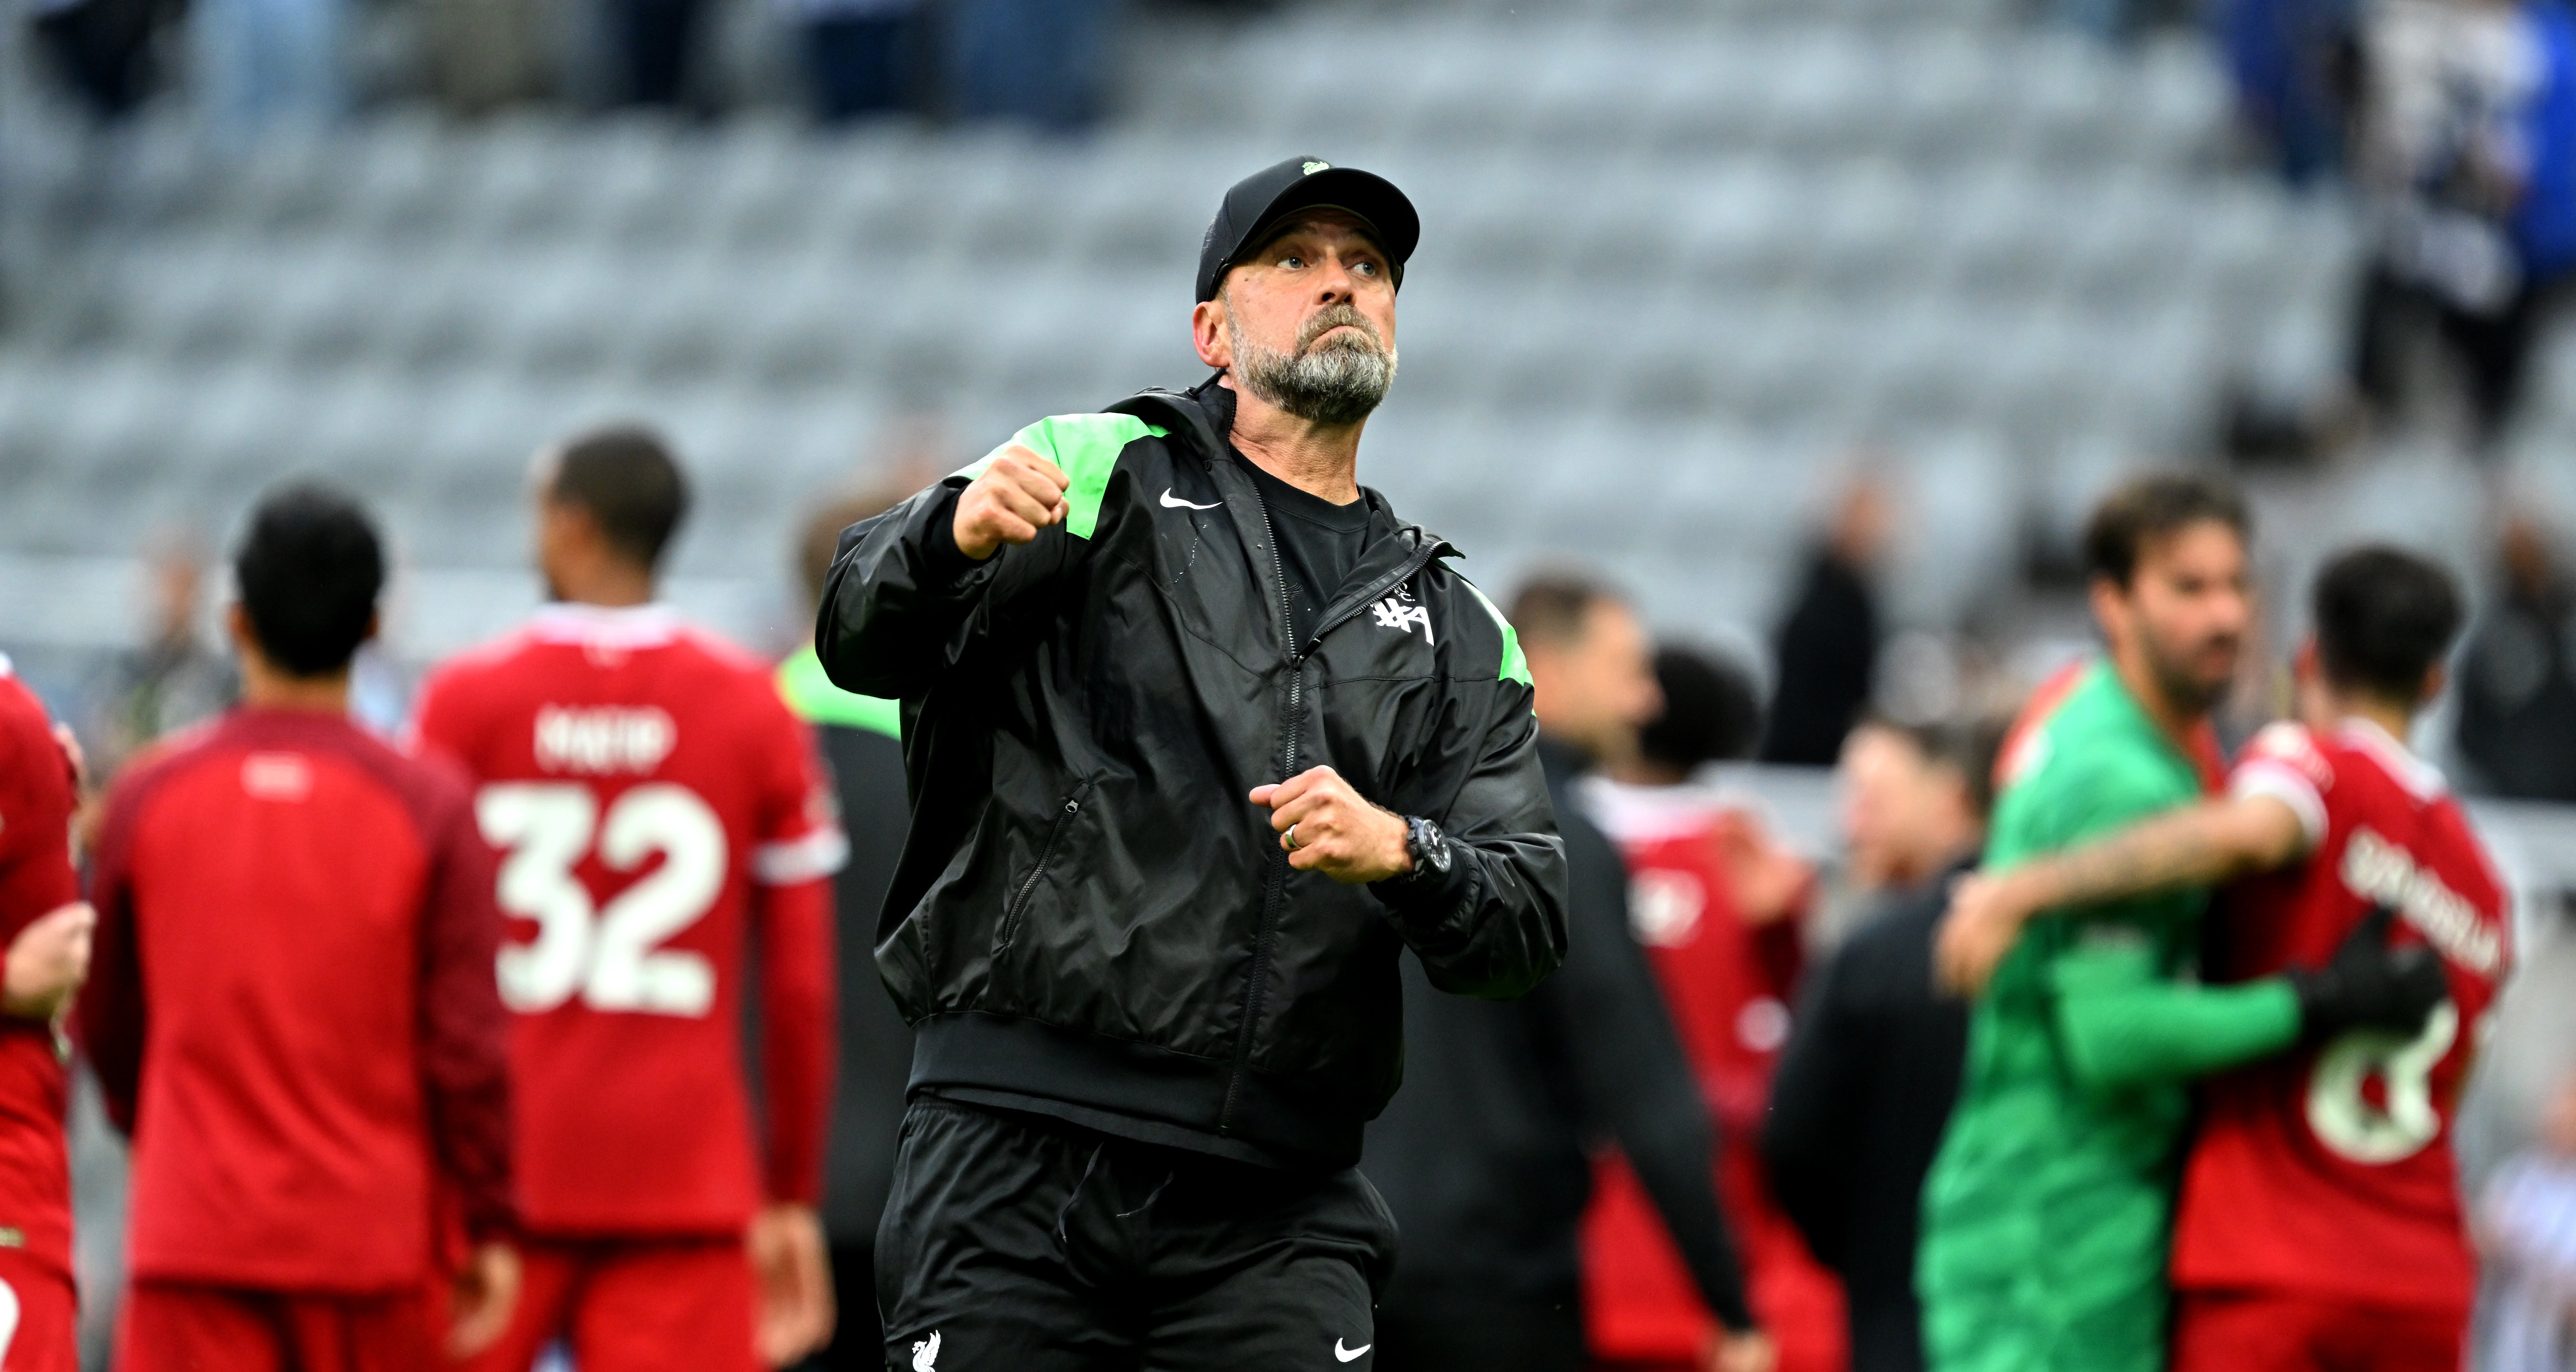 Jurgen Klopp celebrates after Liverpool came back to beat Newcastle